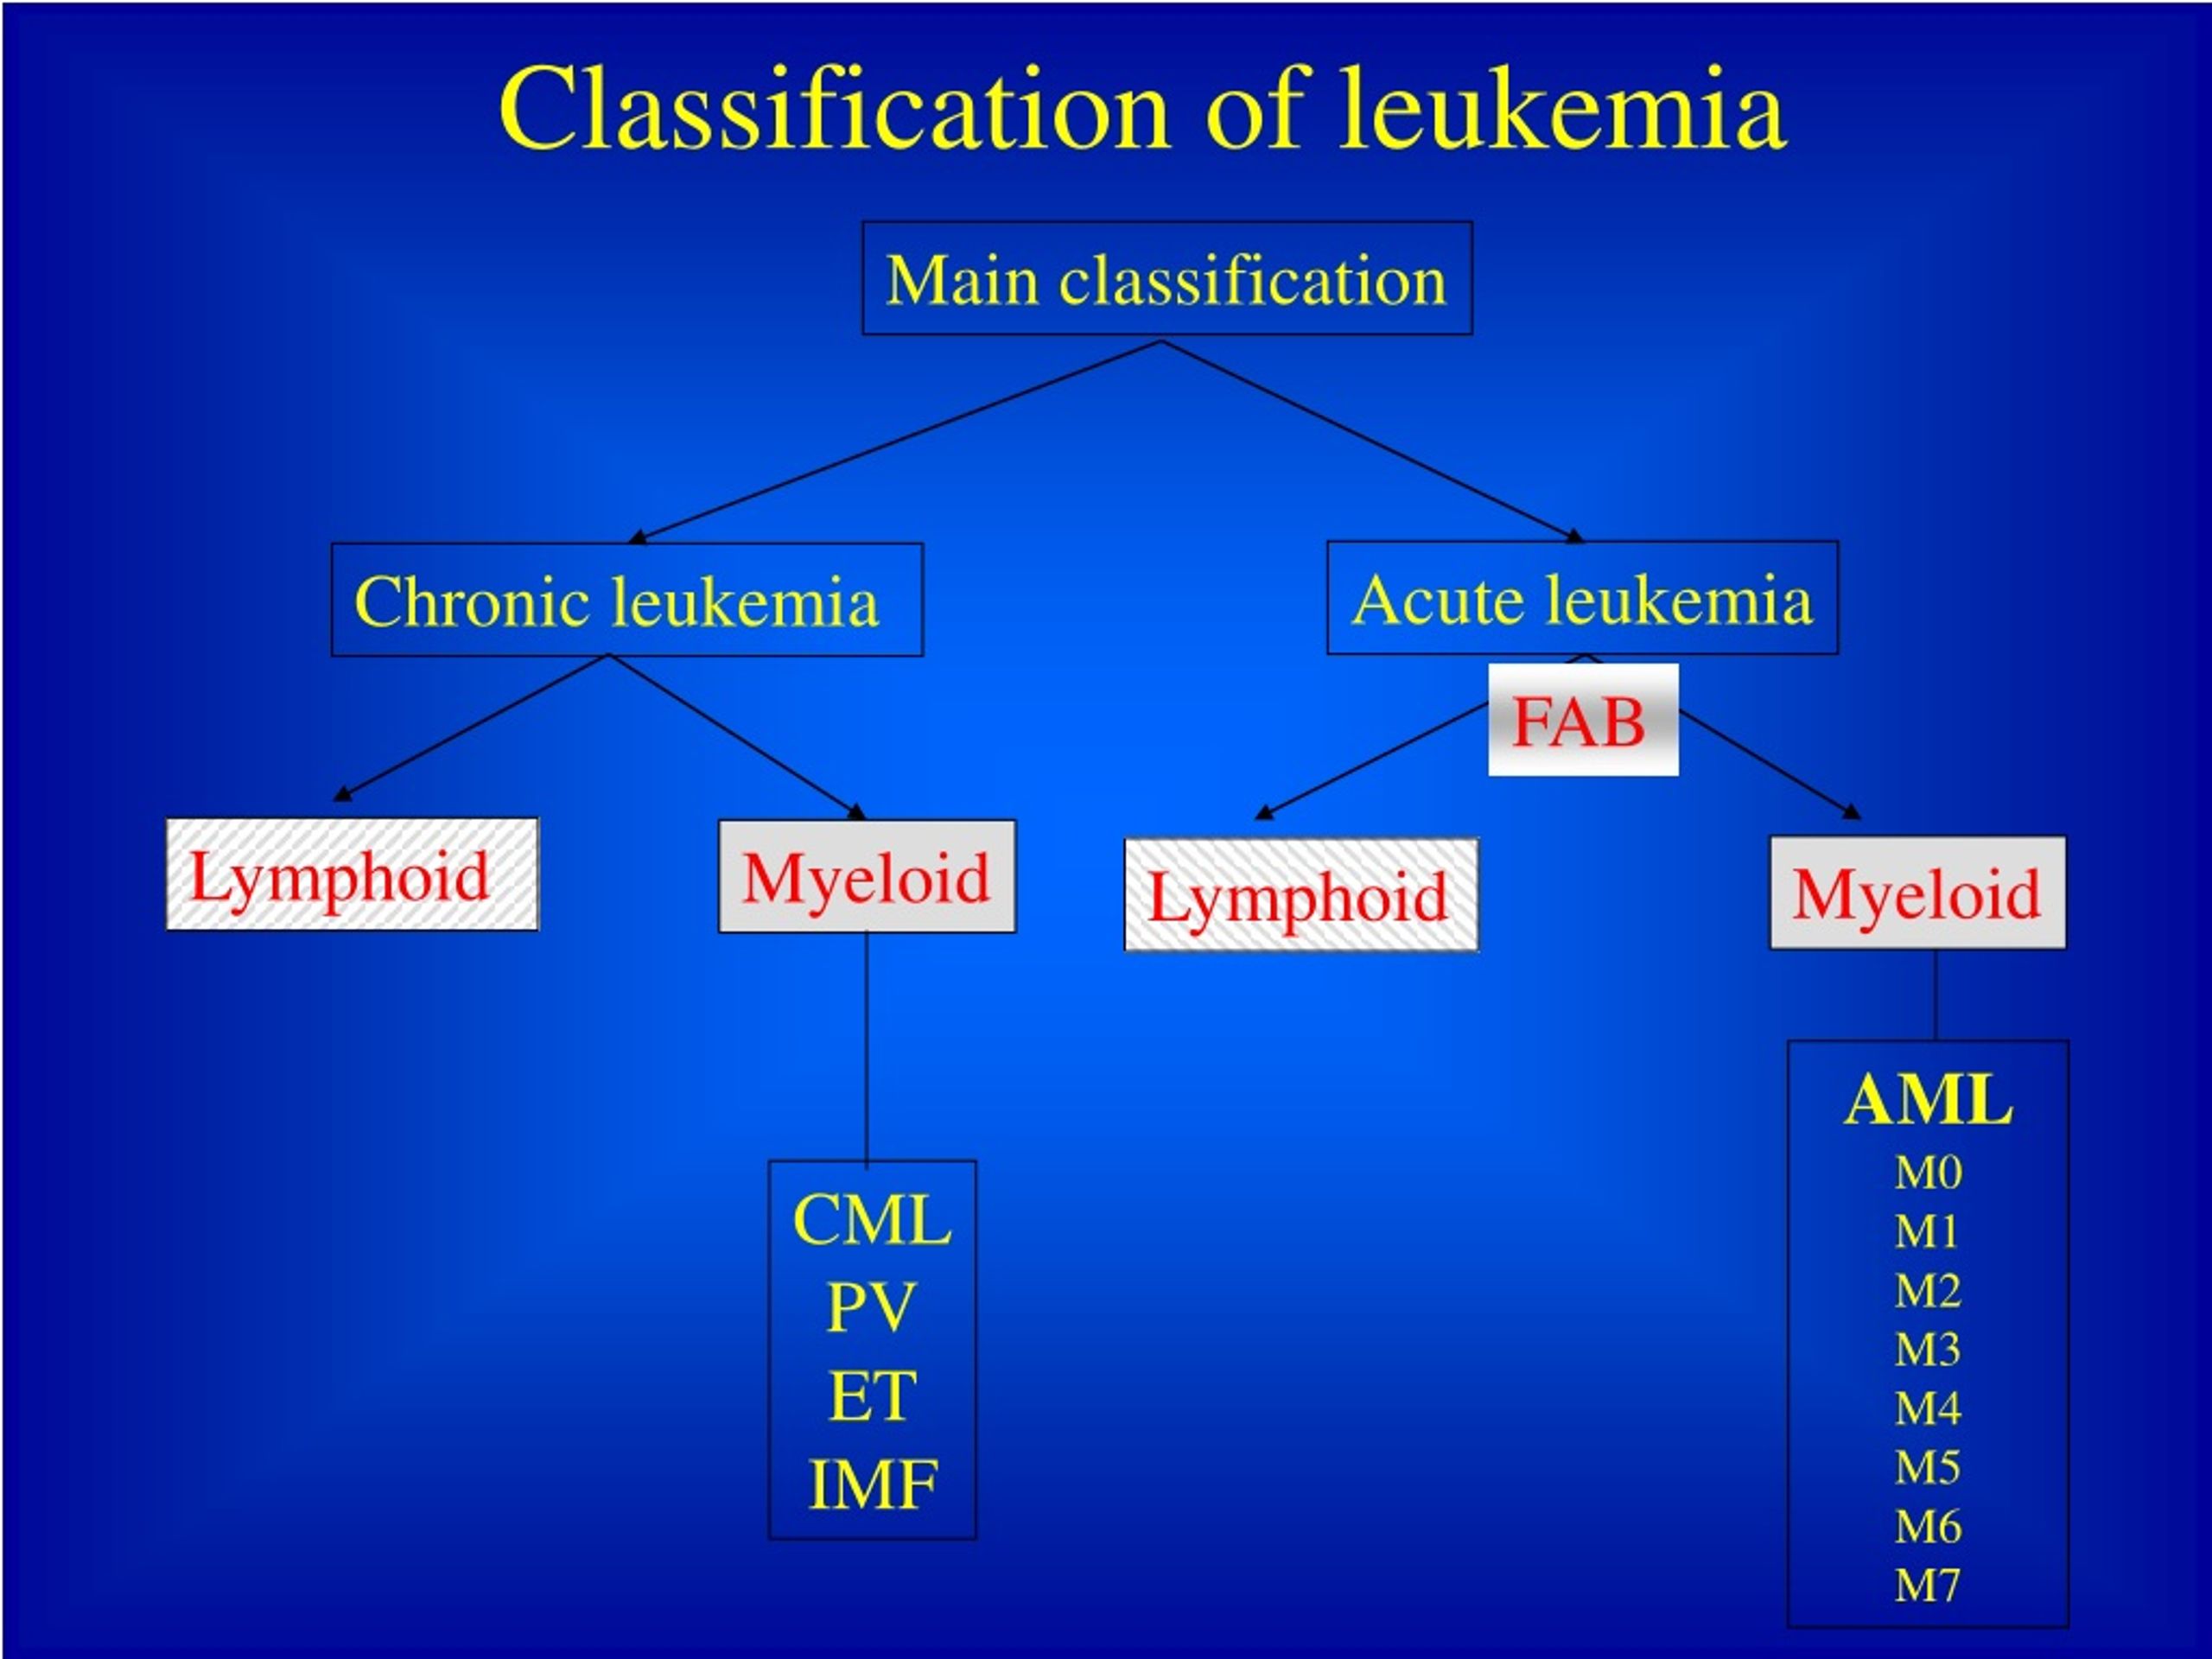 Ppt Introduction To Leukemia Powerpoint Presentation Free Download